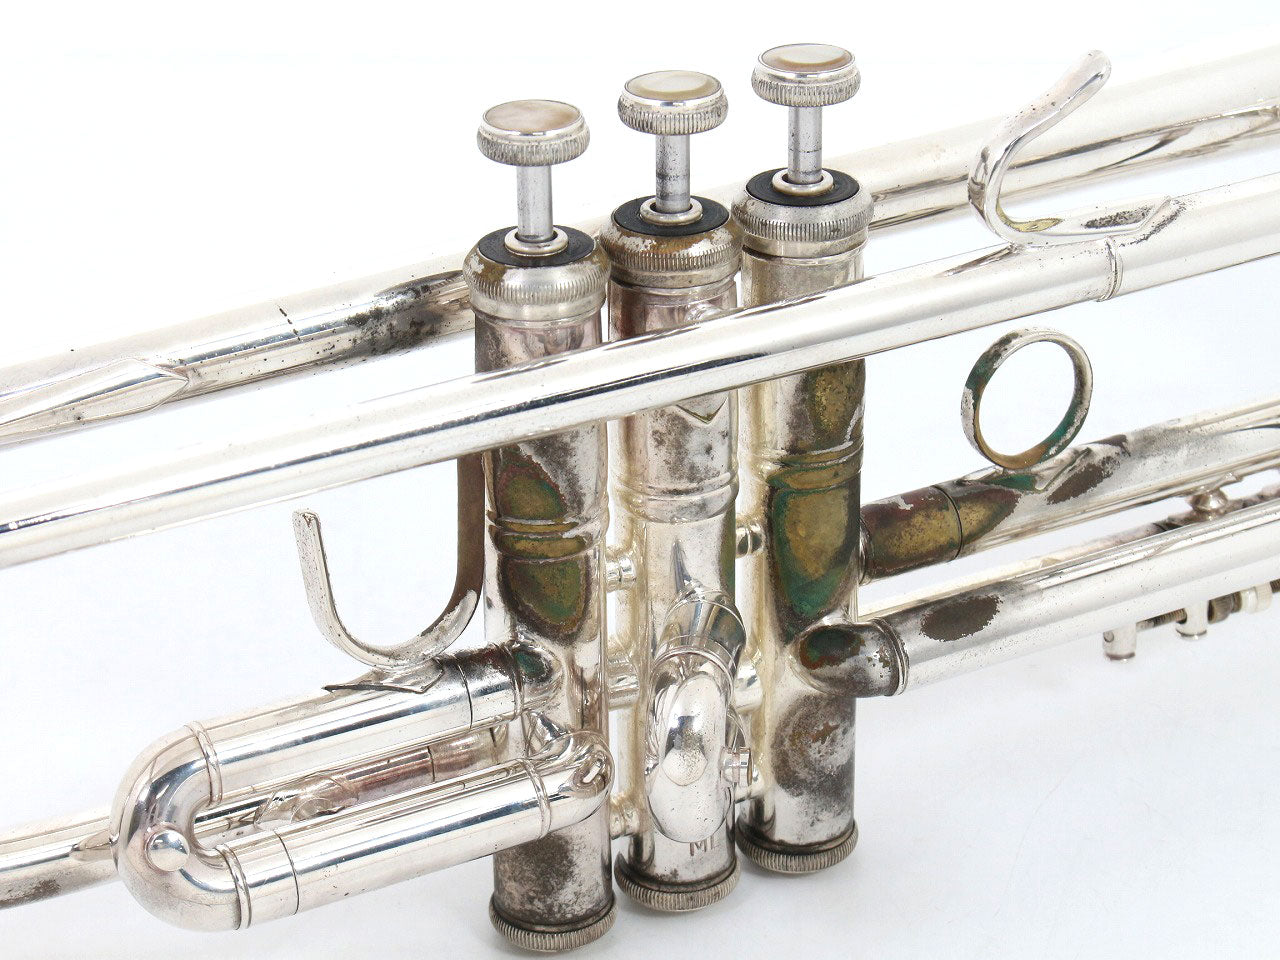 [SN 418323] USED Bach / Trumpet 180ML 37/25 SP silver plated [20]